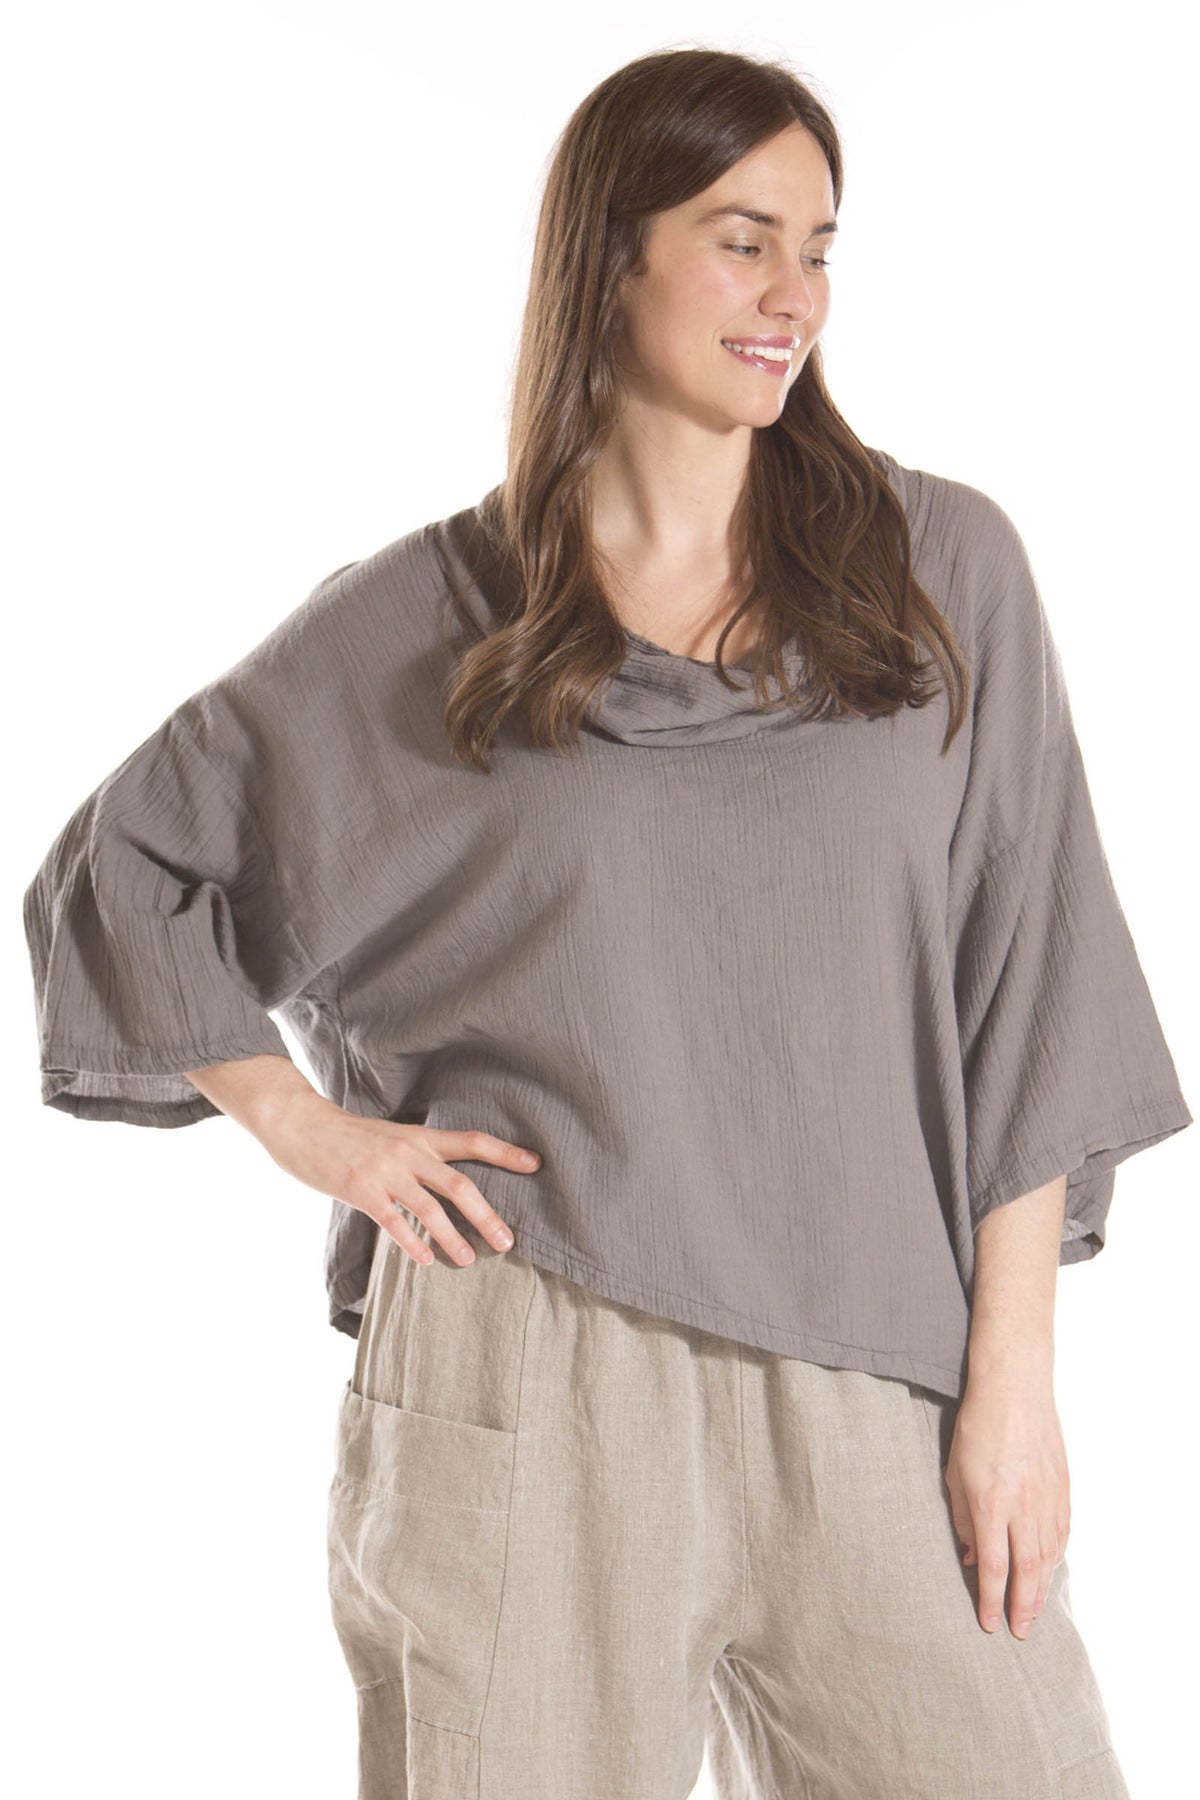 Breezy Angle Top UnPrinted